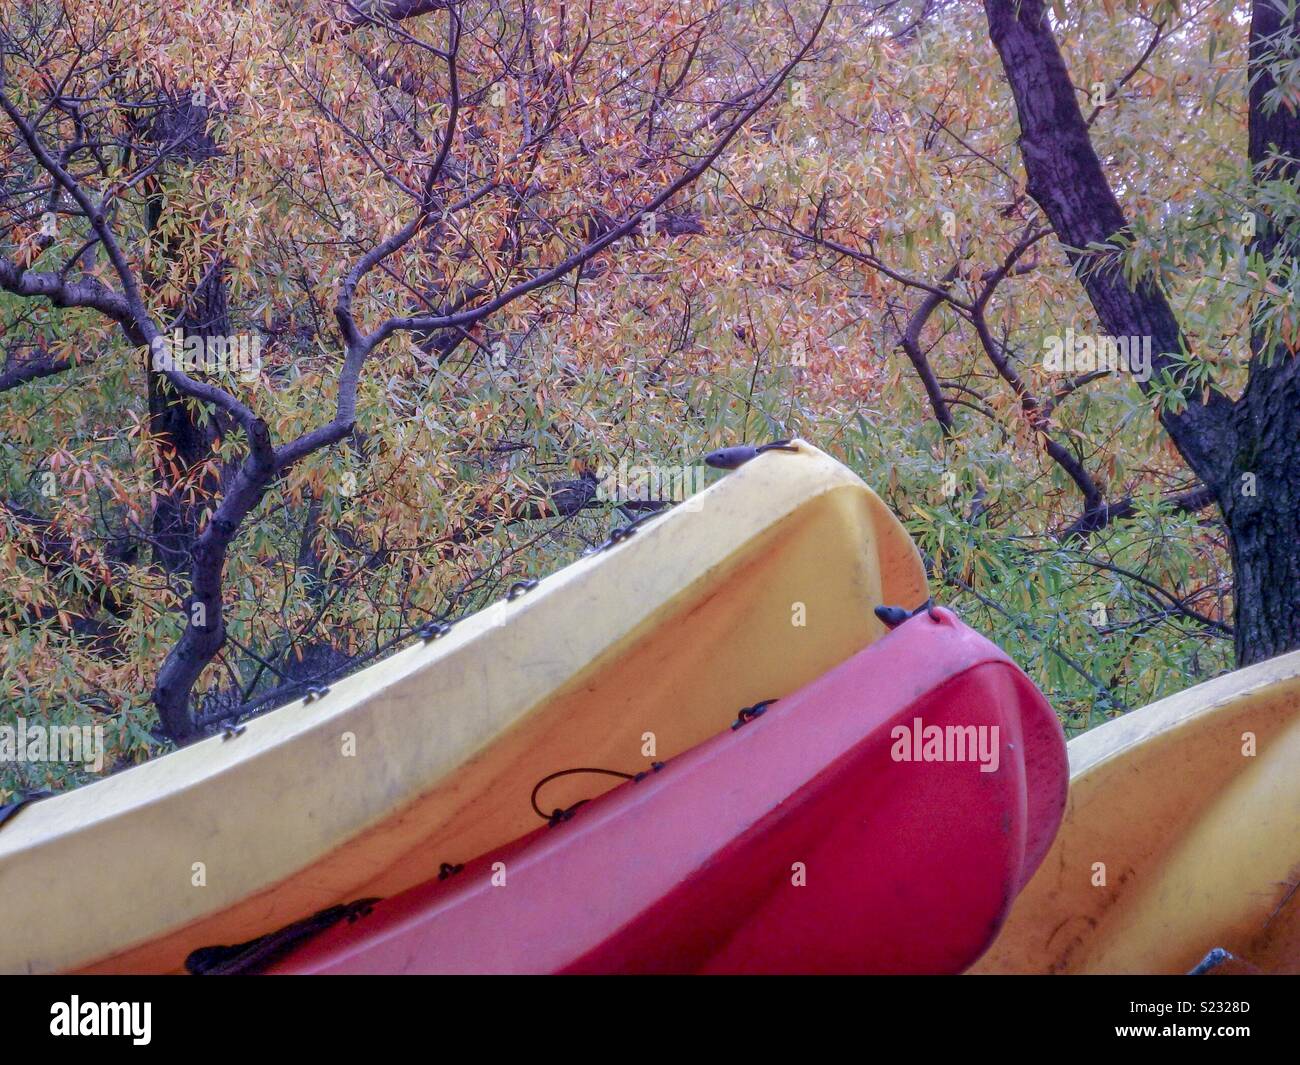 Red and yellow kayaks stacked up in Central Park,Manhattan during the beautiful autumn season Stock Photo